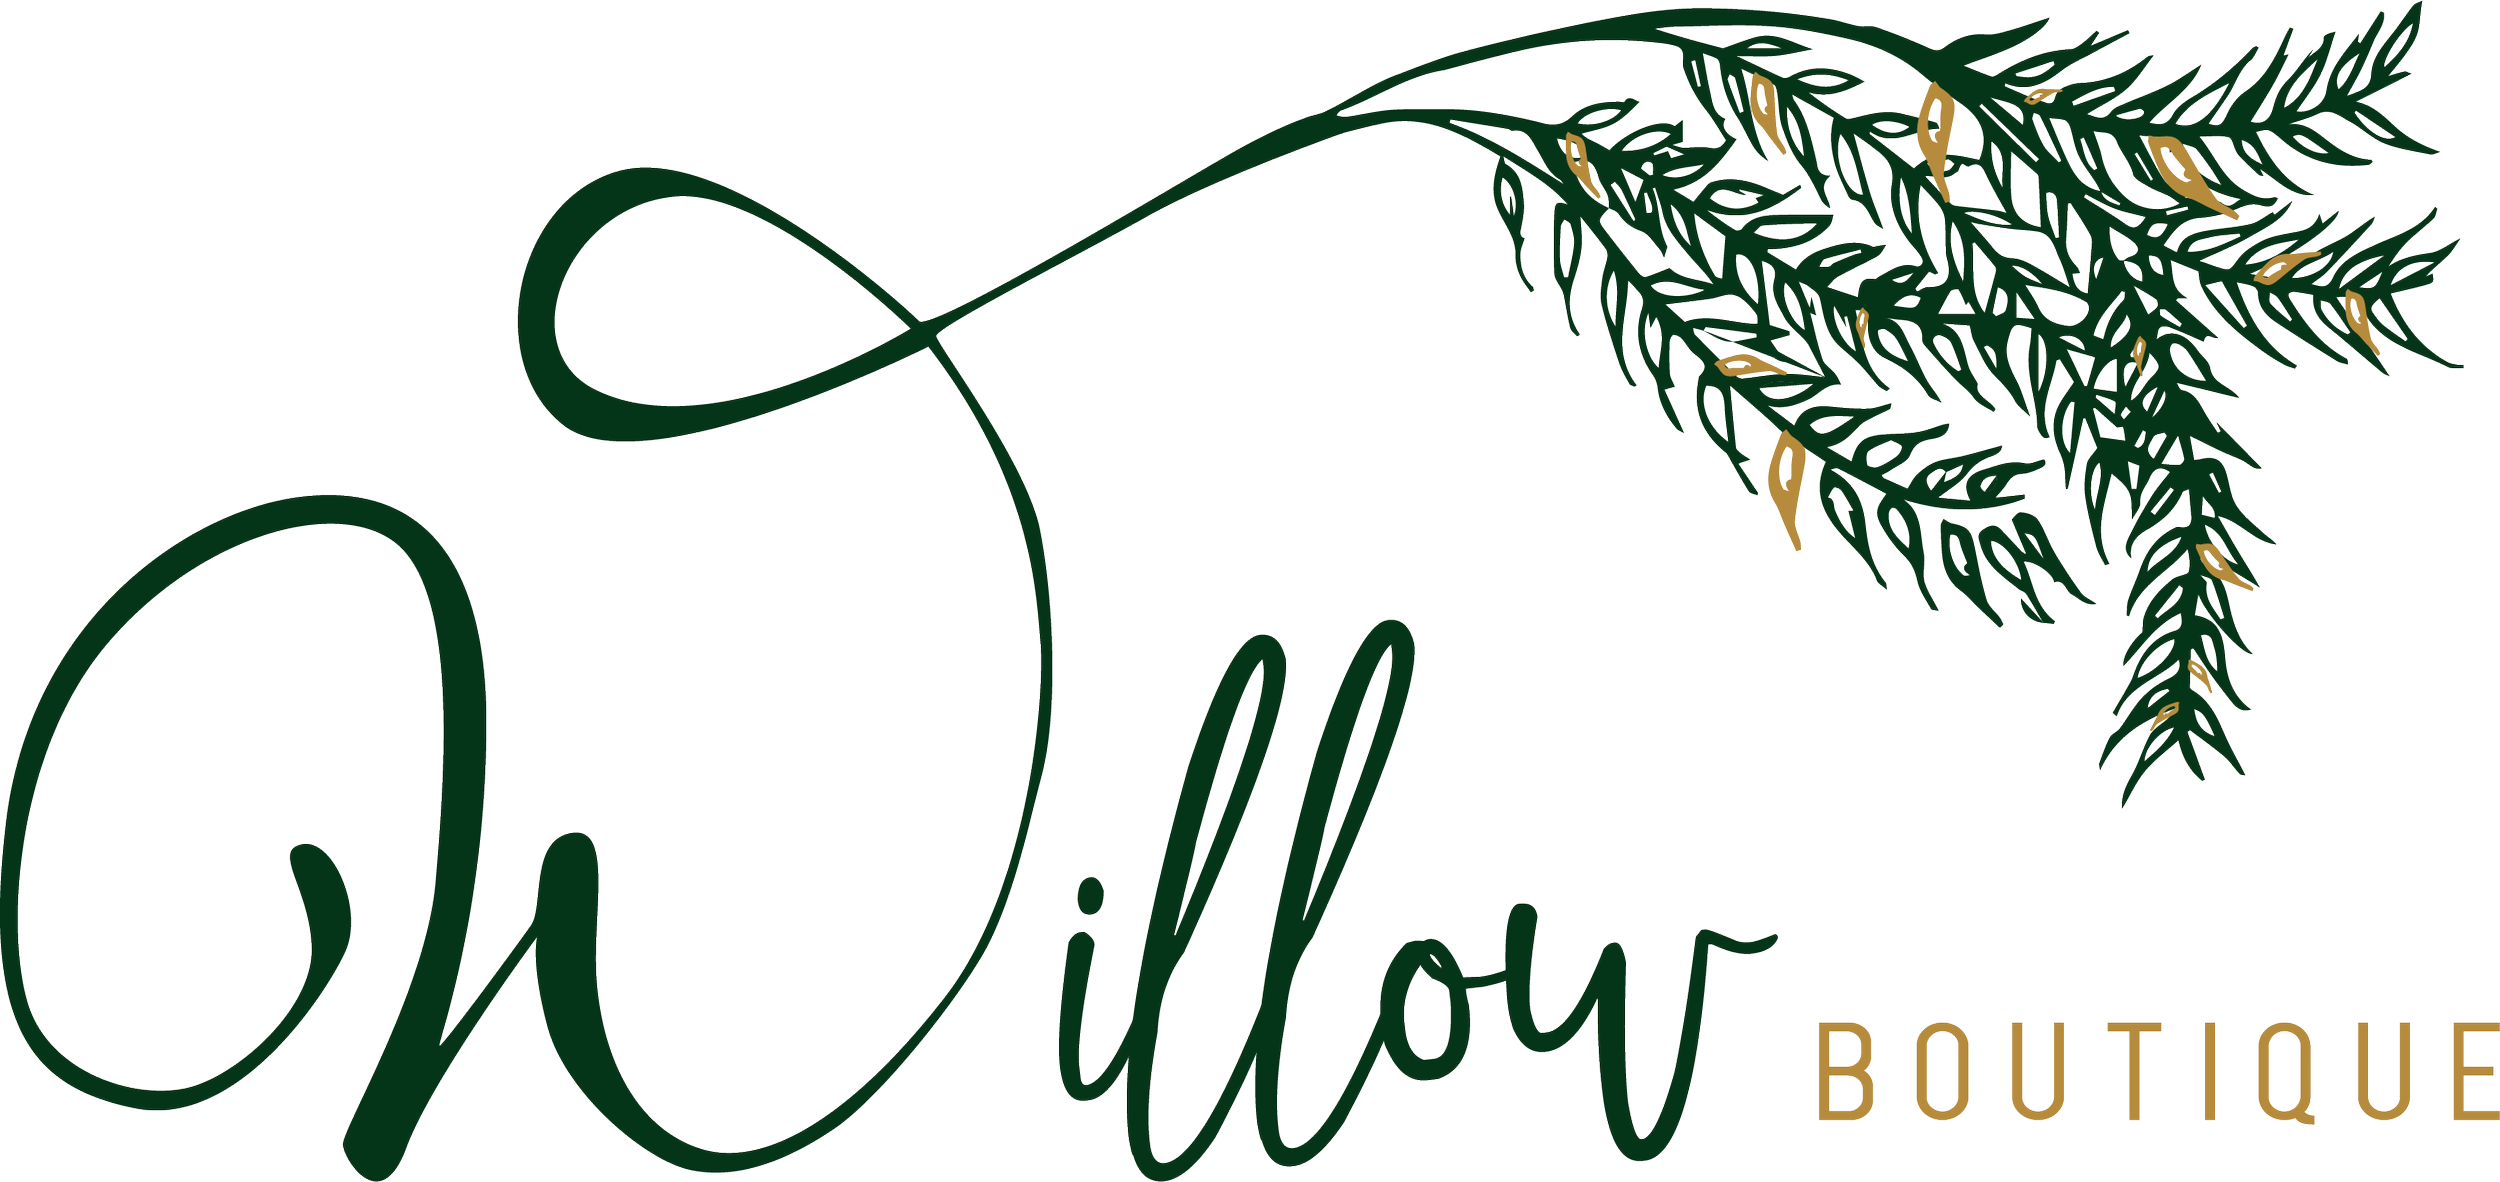 Willow Boutigue Logo.png